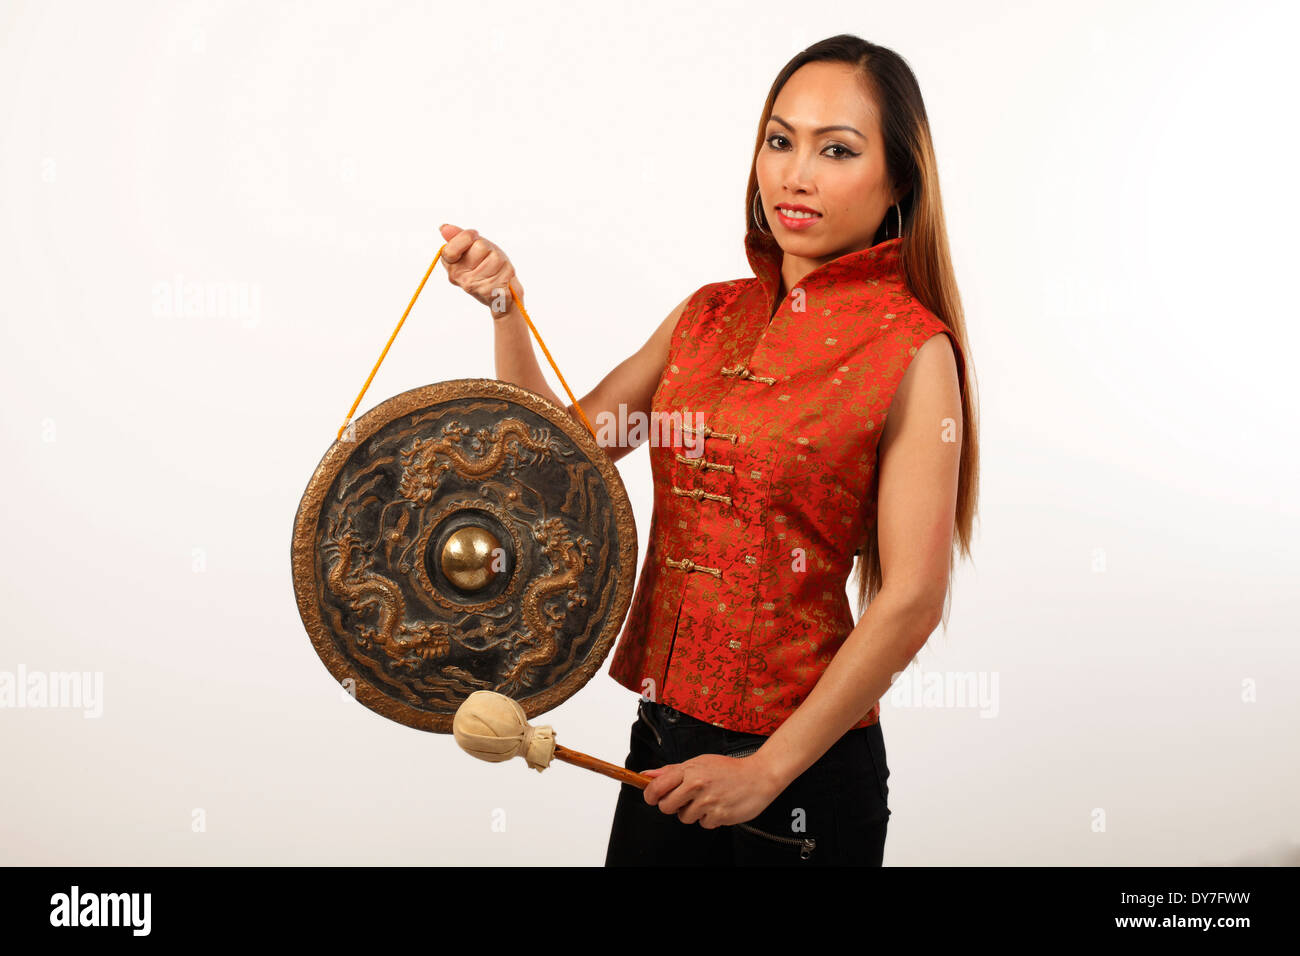 Chinese Gong played by an Asian or Oriental lady Stock Photo - Alamy